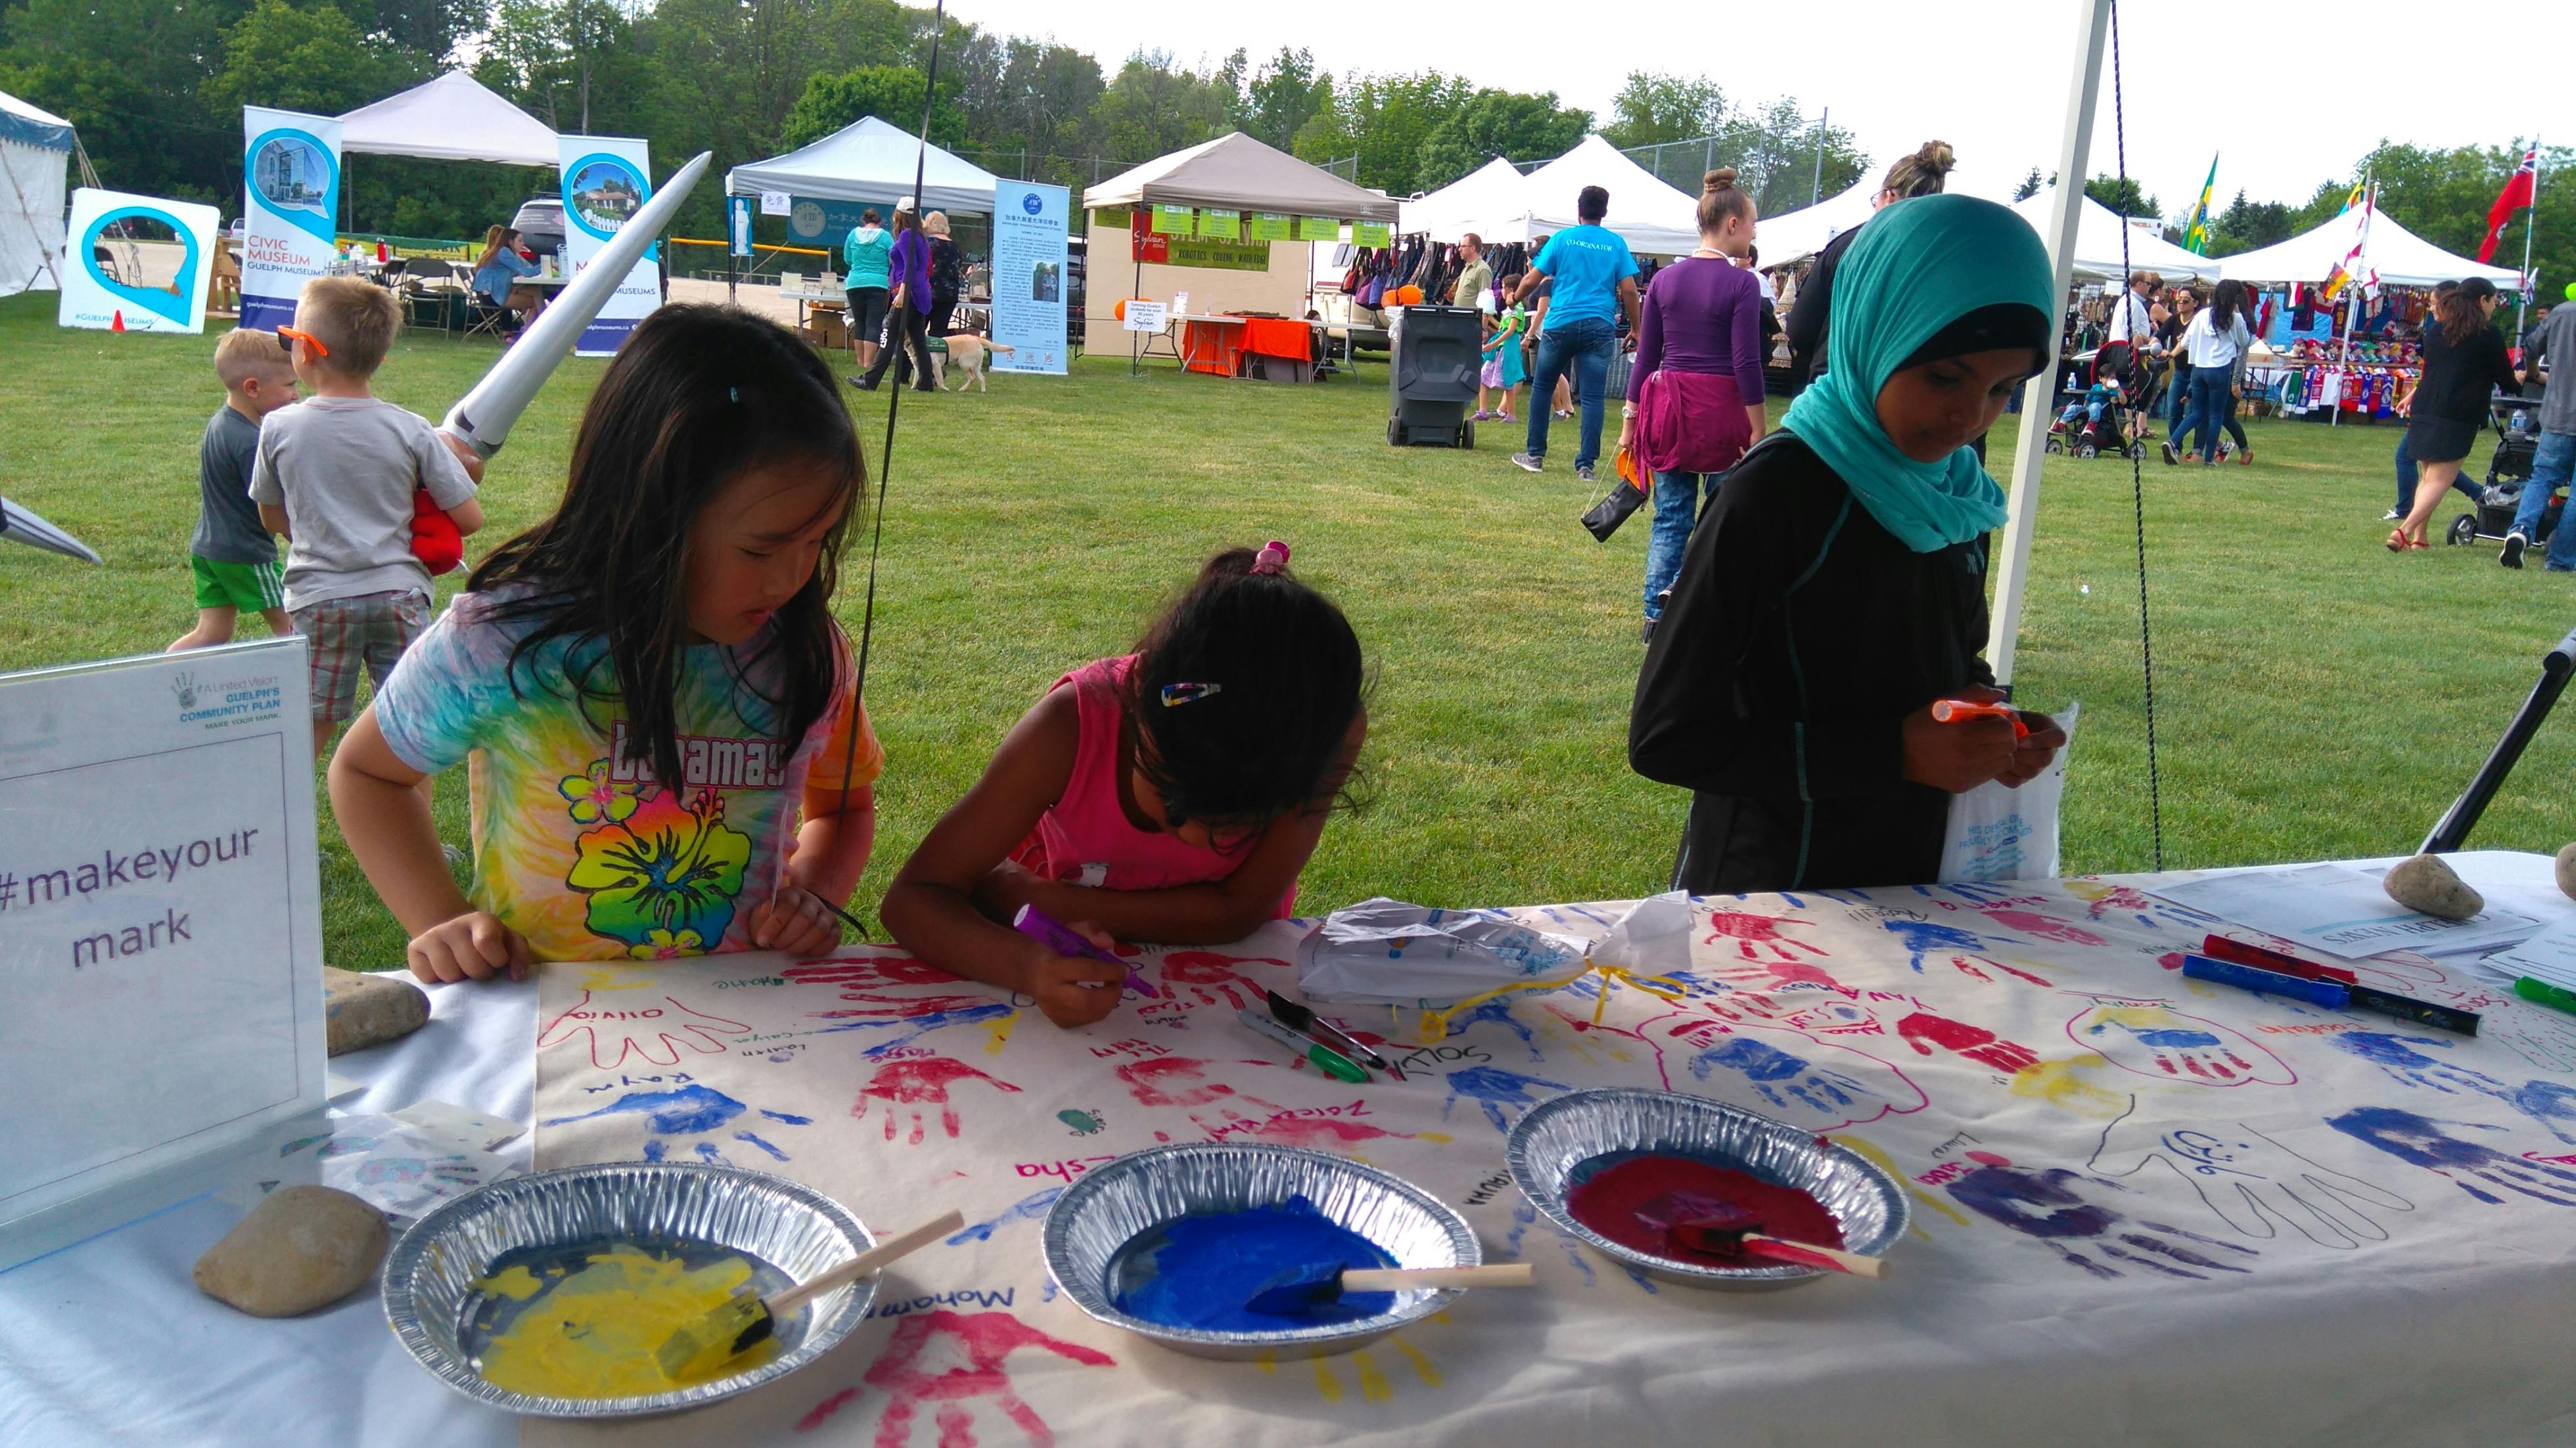 Some kids making their mark at the Multicultural Festival